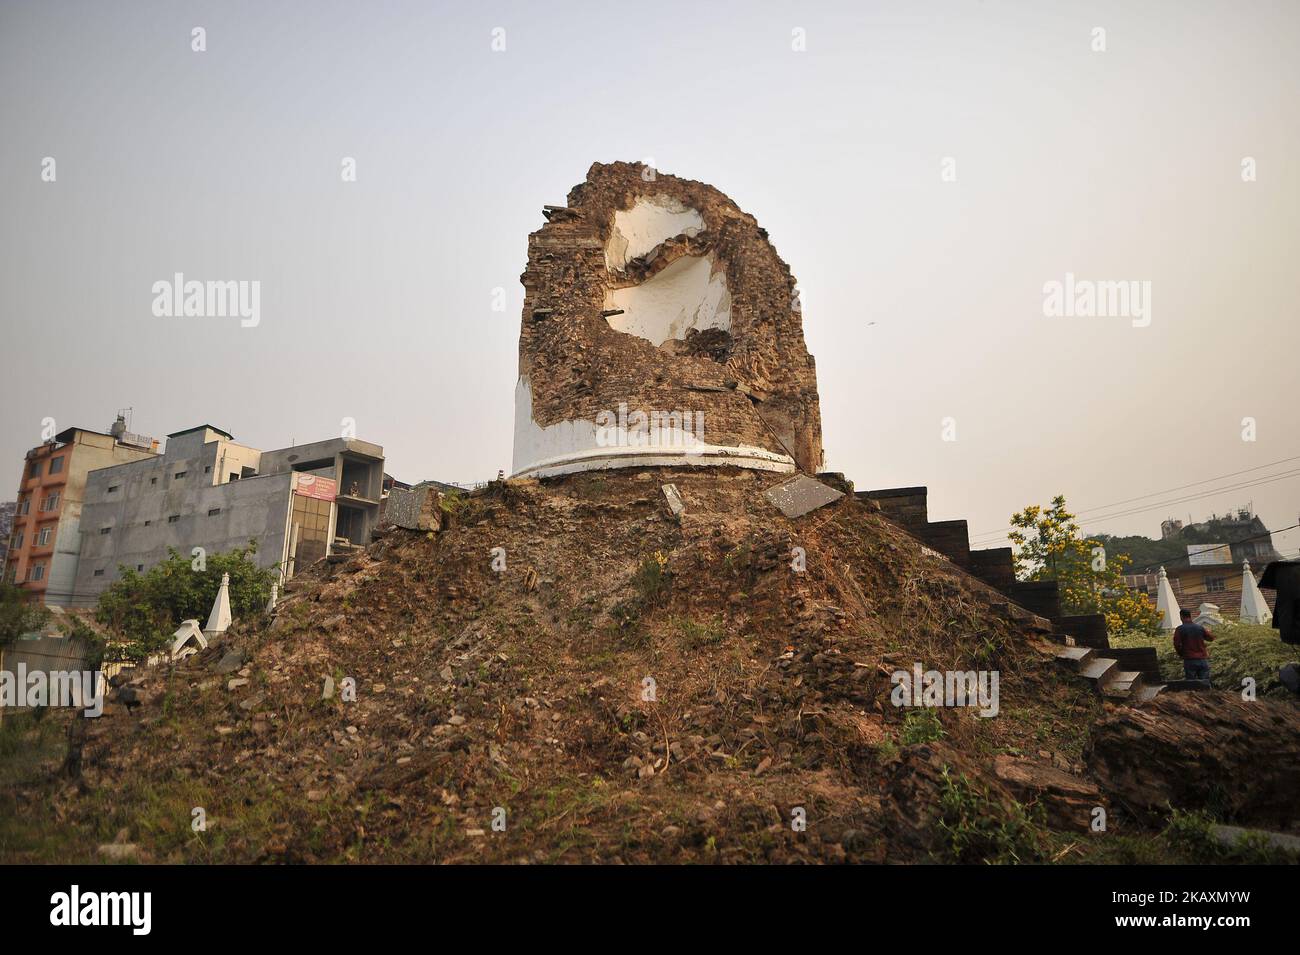 A reminisce part of historic tower Dharahara knocked down on April 25, 2015 Gorkha Earthquake remembered during third anniversary in Kathmandu, Nepal on Wednesday, April 25, 2018. Most of the centuries-old monuments and houses were completely or partially destroyed in the catastrophic 7.8 magnitude earthquake that killed over 9,000 people, leaving thousands injured. (Photo by Narayan Maharjan/NurPhoto) Stock Photo